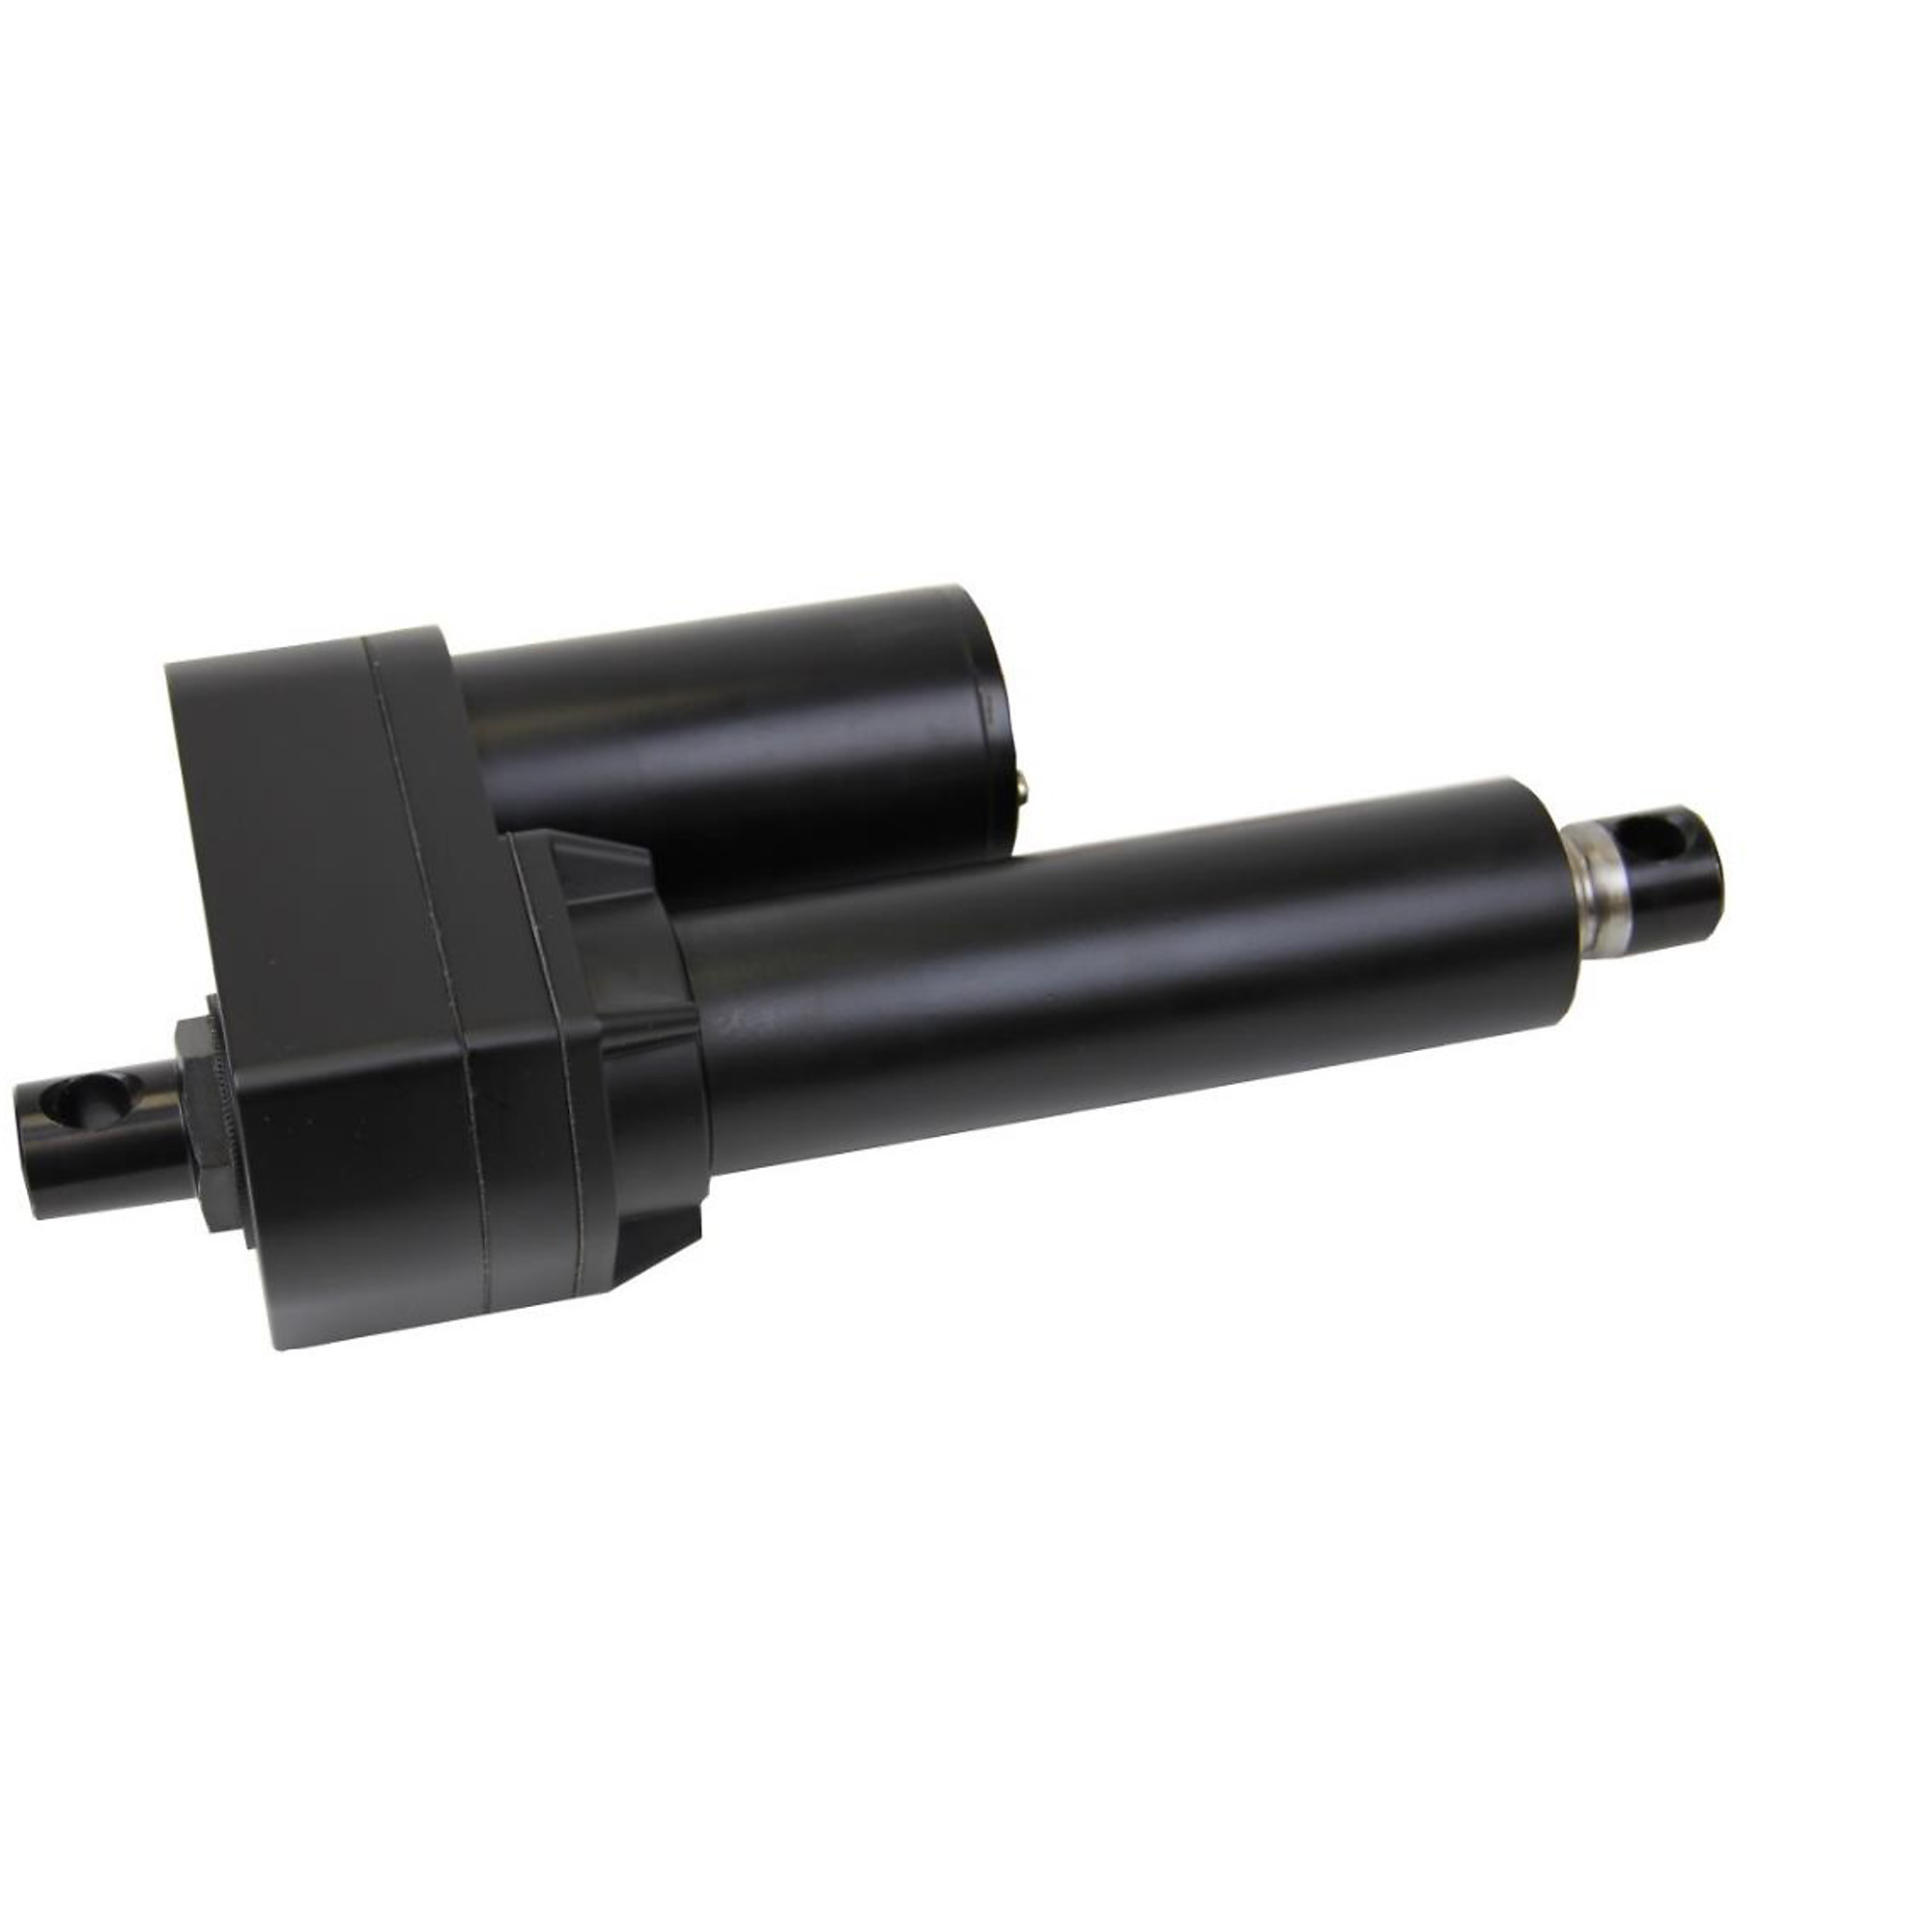 Glideforce, High Perf. Ind. Actuator 1000 Lb rating, Stroke Length 4.02 in, Model GF17-121004-1-65